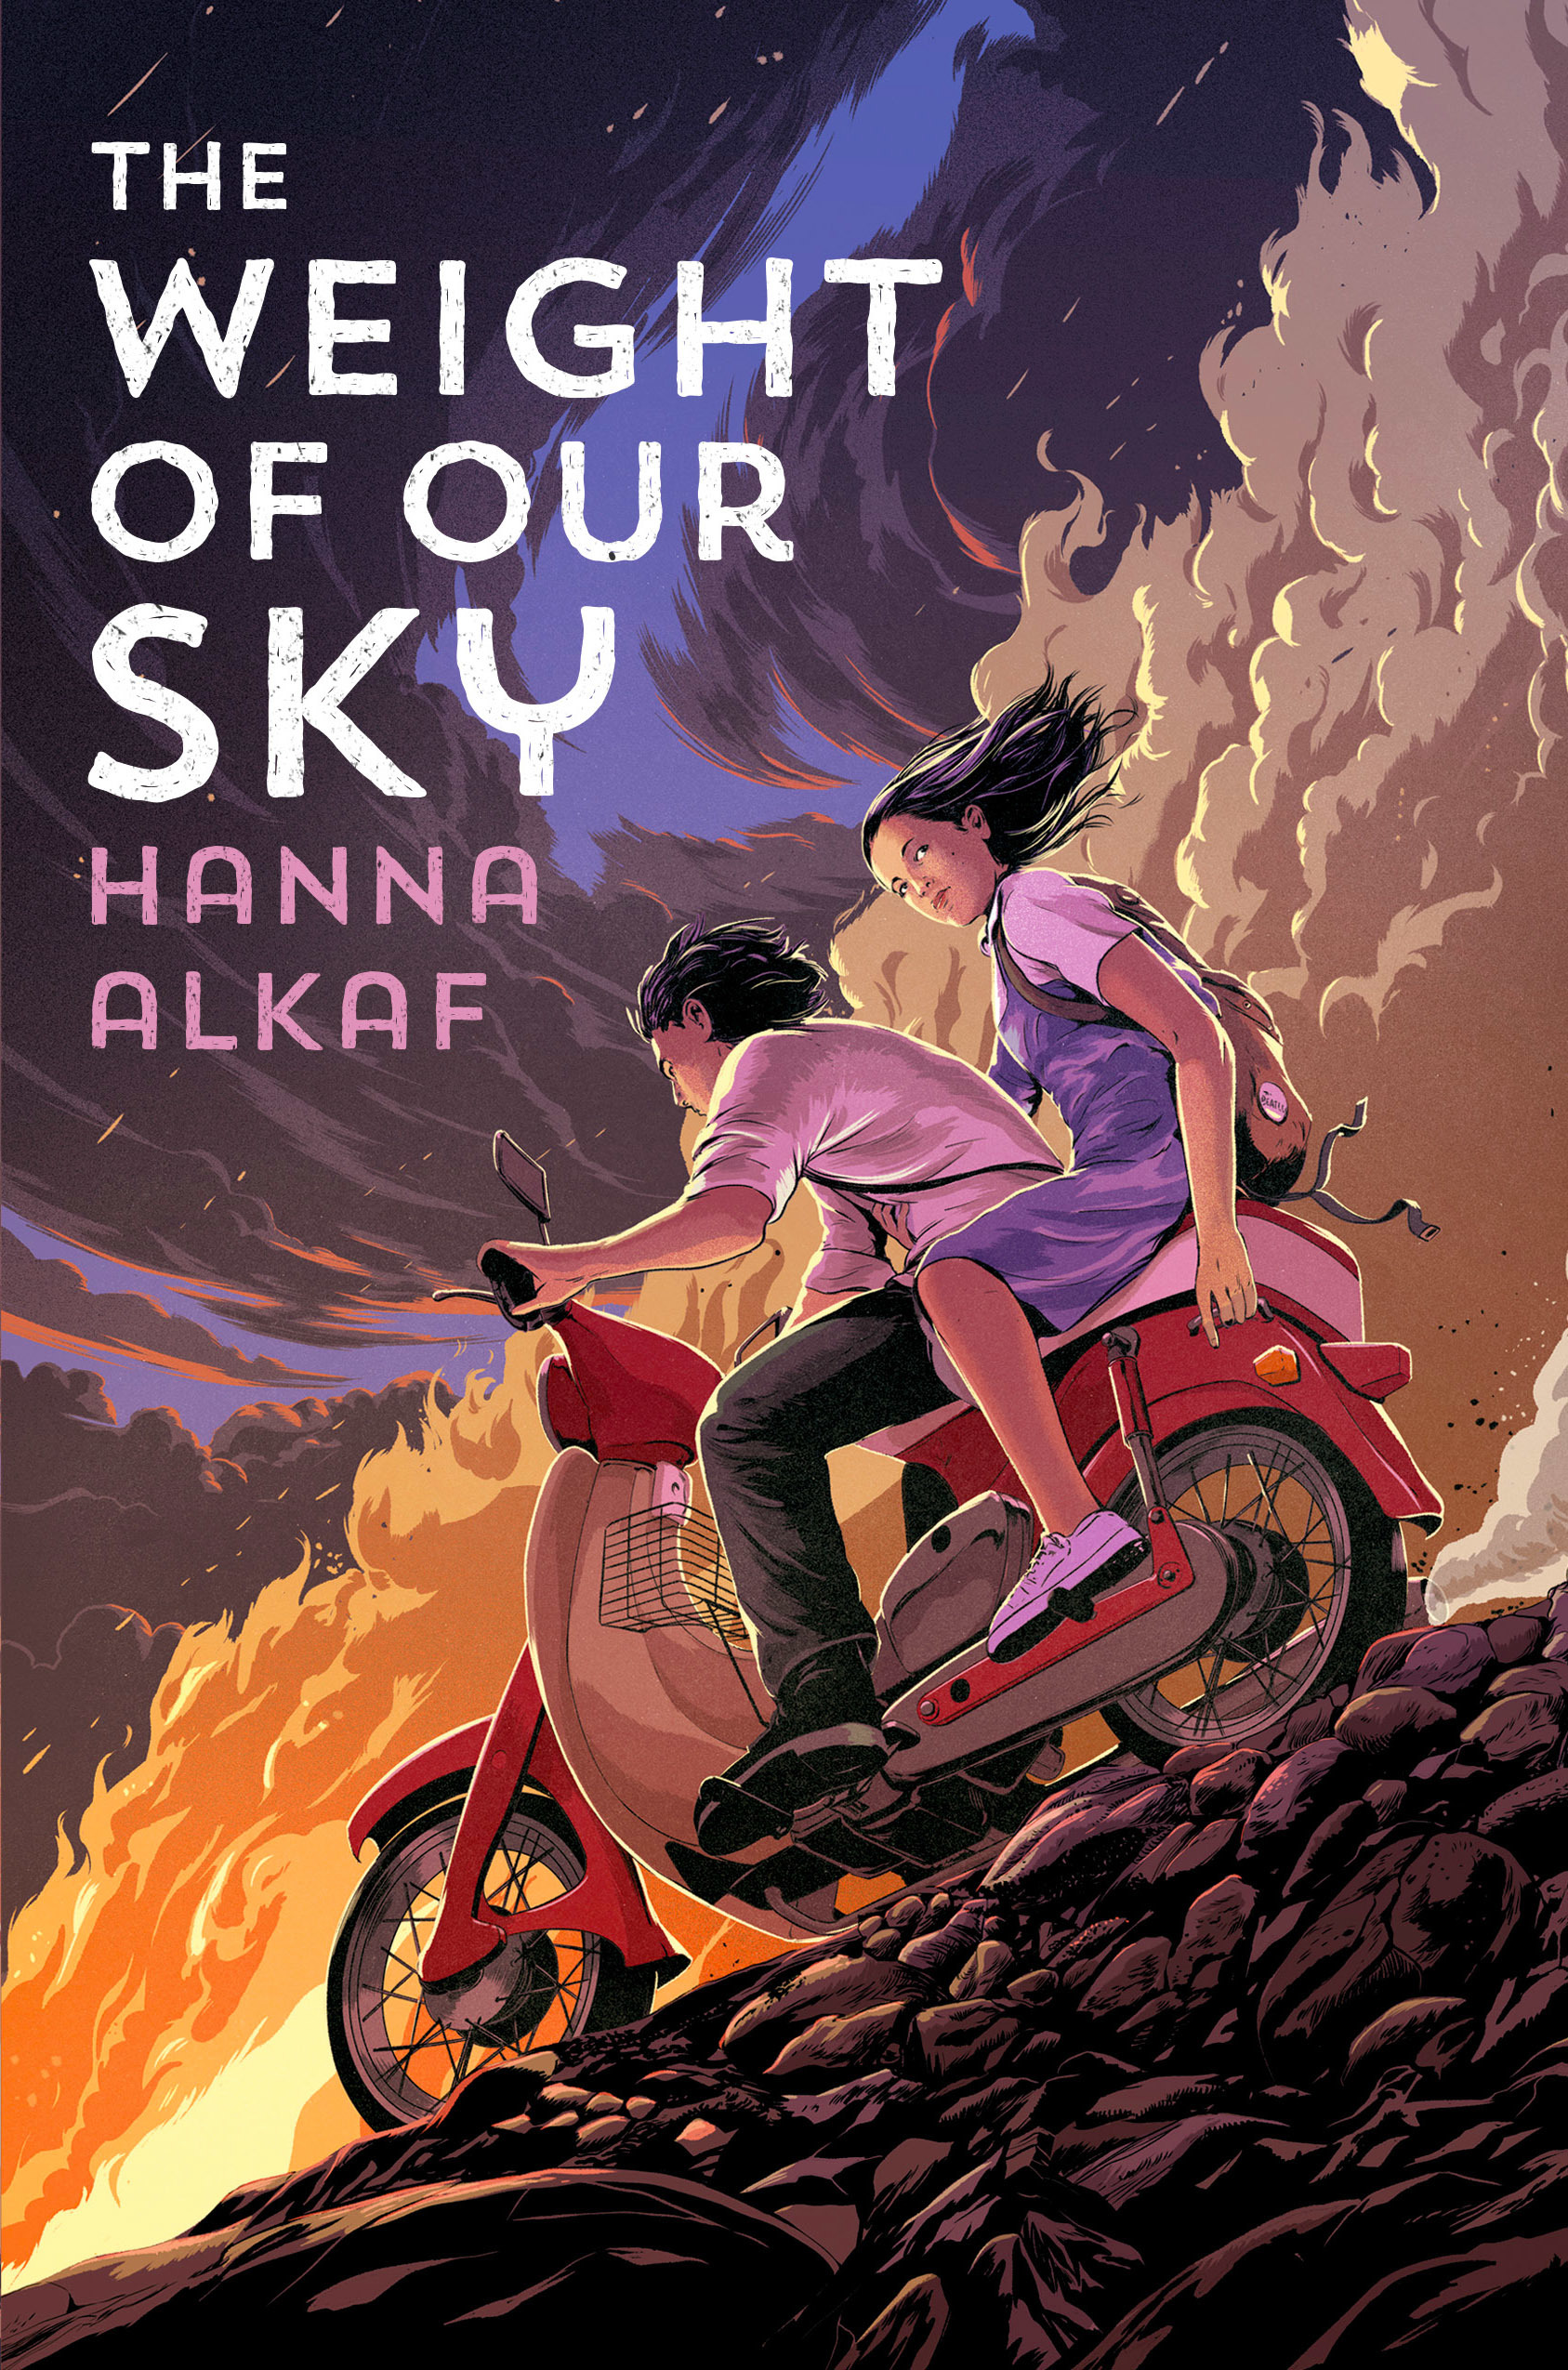 Cover for "The Weight of Our Sky"